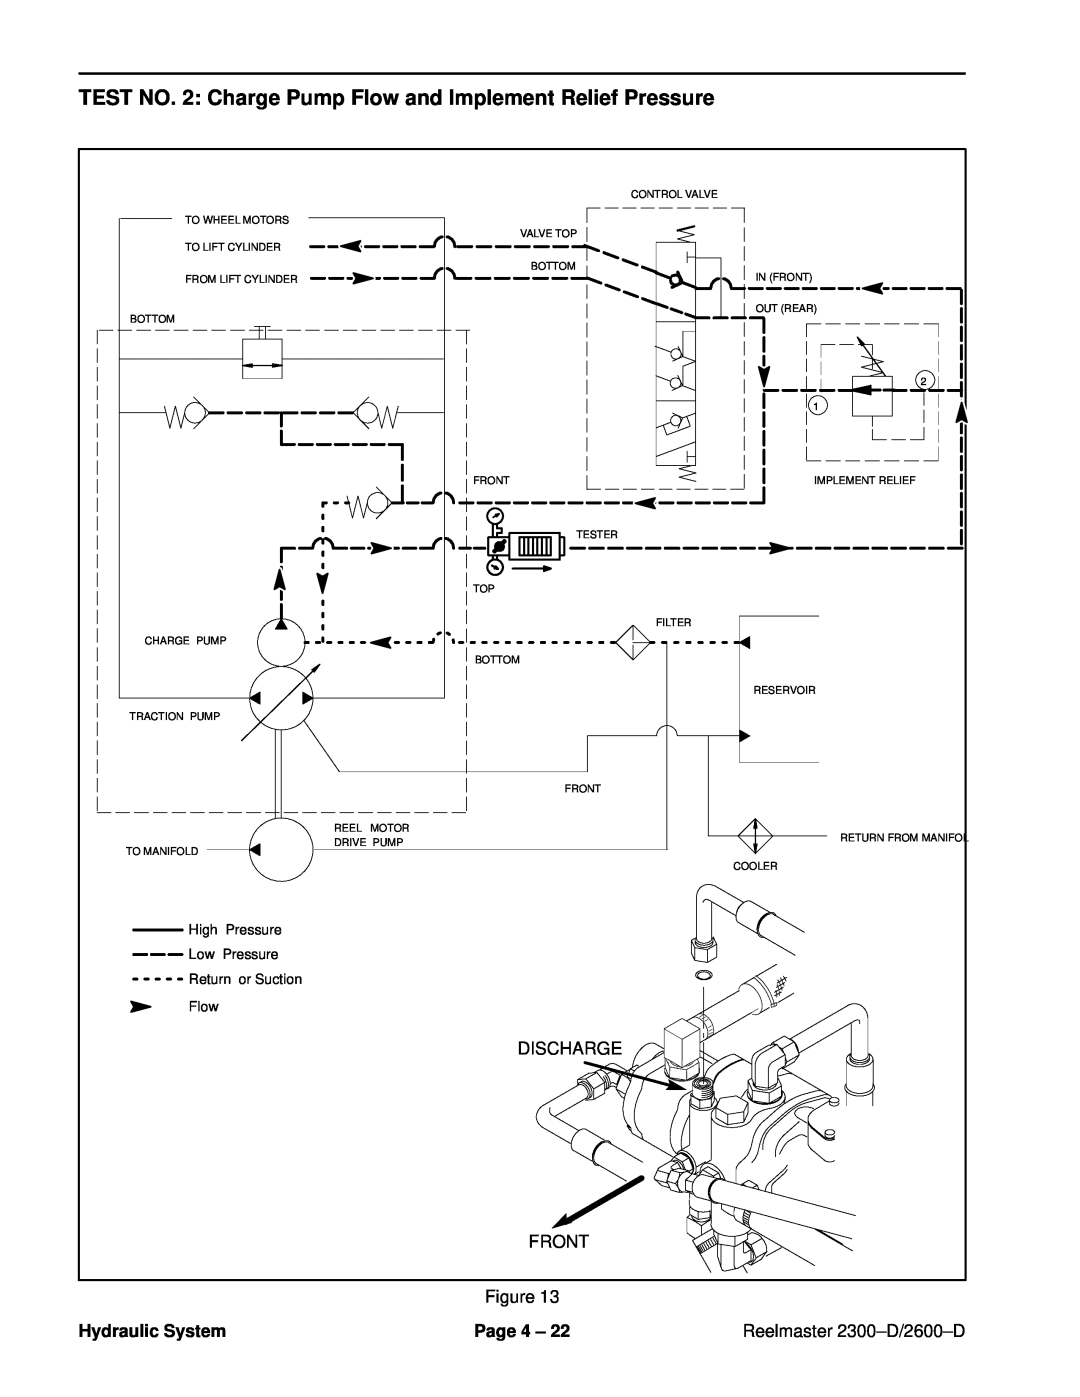 Toro 2300-D, 2600D service manual TEST NO. 2 Charge Pump Flow and Implement Relief Pressure, Hydraulic System, Page 4 ± 